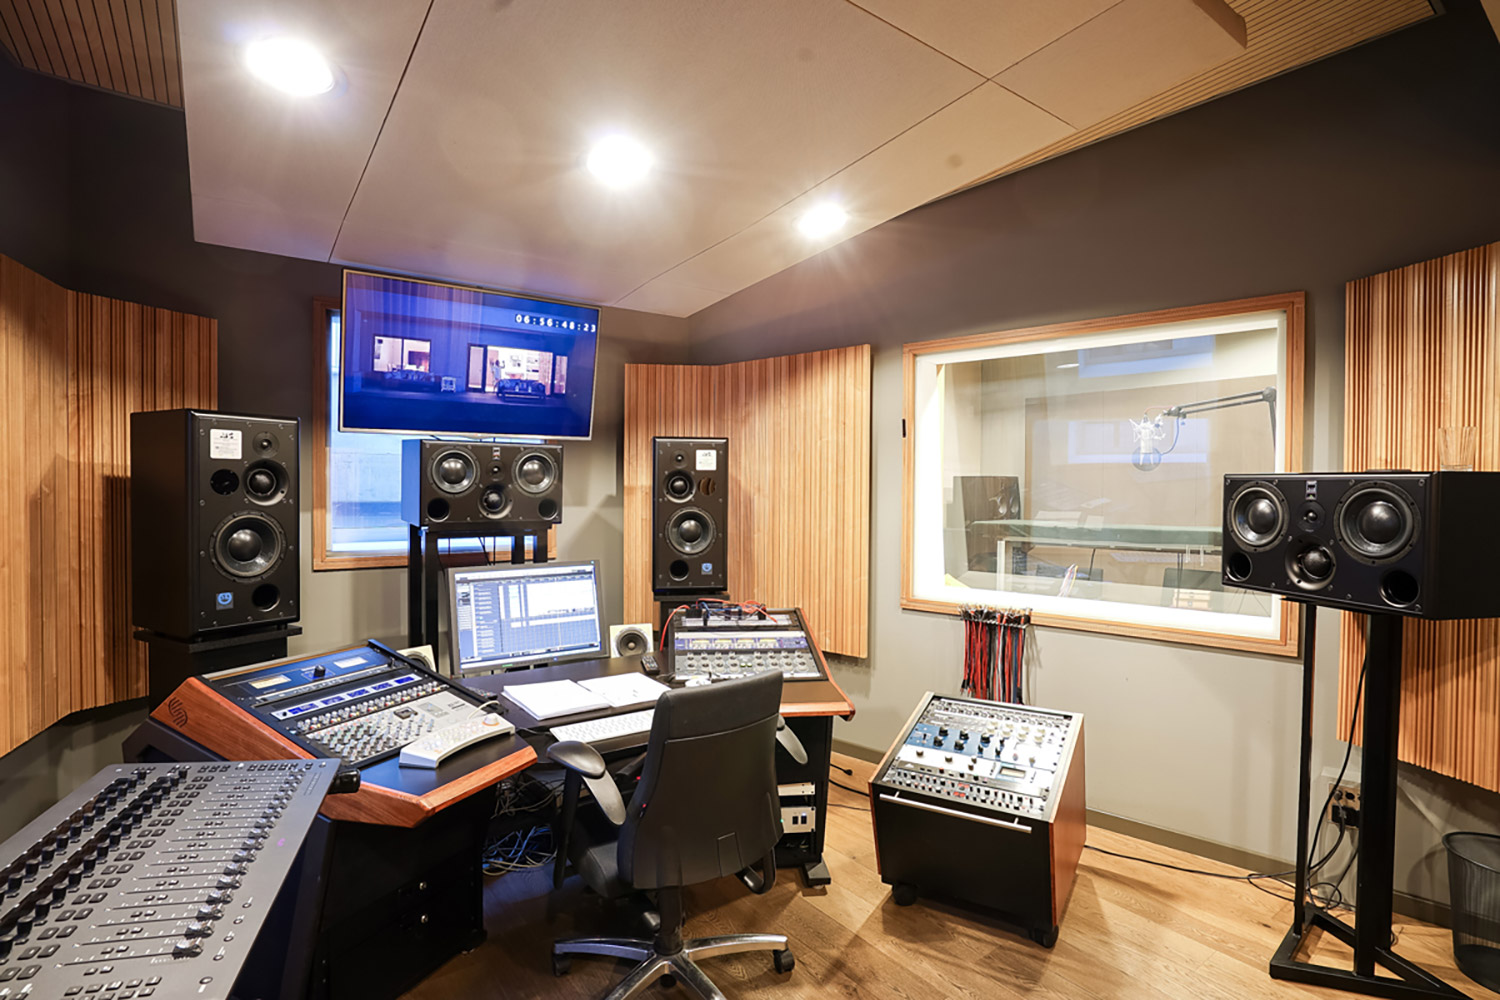 Sunshine Music has provided the Austrian music community with impeccable creative mastering and recording services since 1995. Designed and tuned by WSDG, Sunshine just upgraded their speakers to ATC Pro models. Mastering 2.